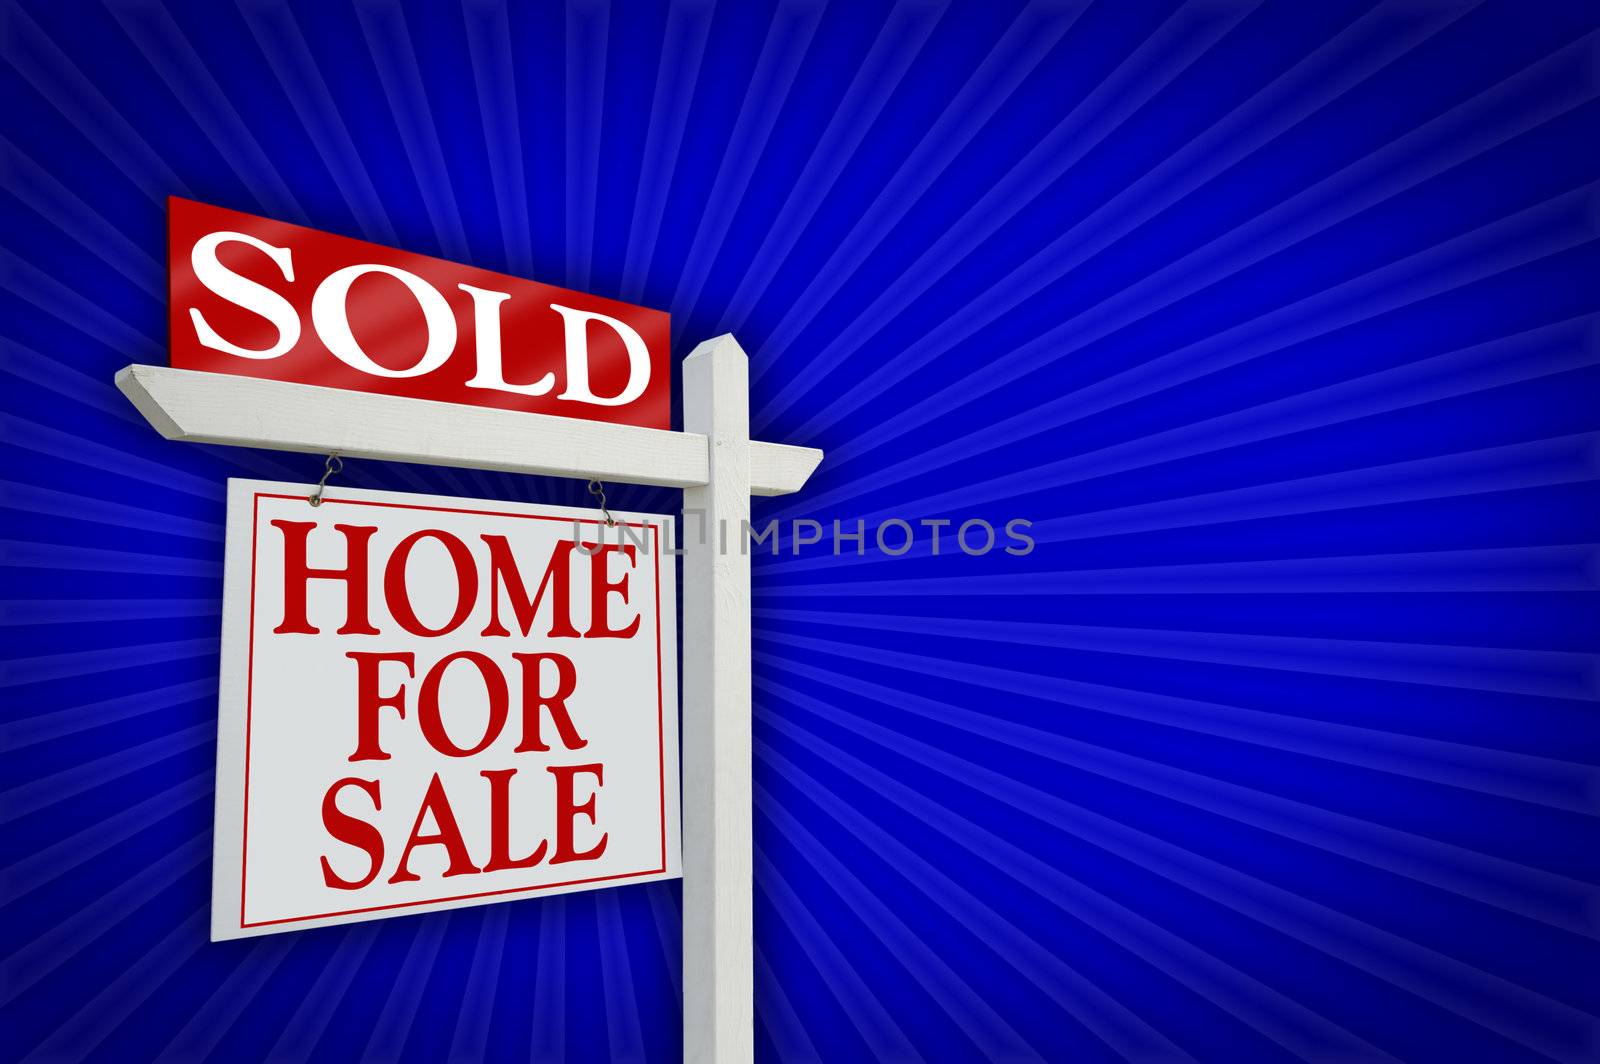 Sold Home for Sale sign on dramatic blue background.